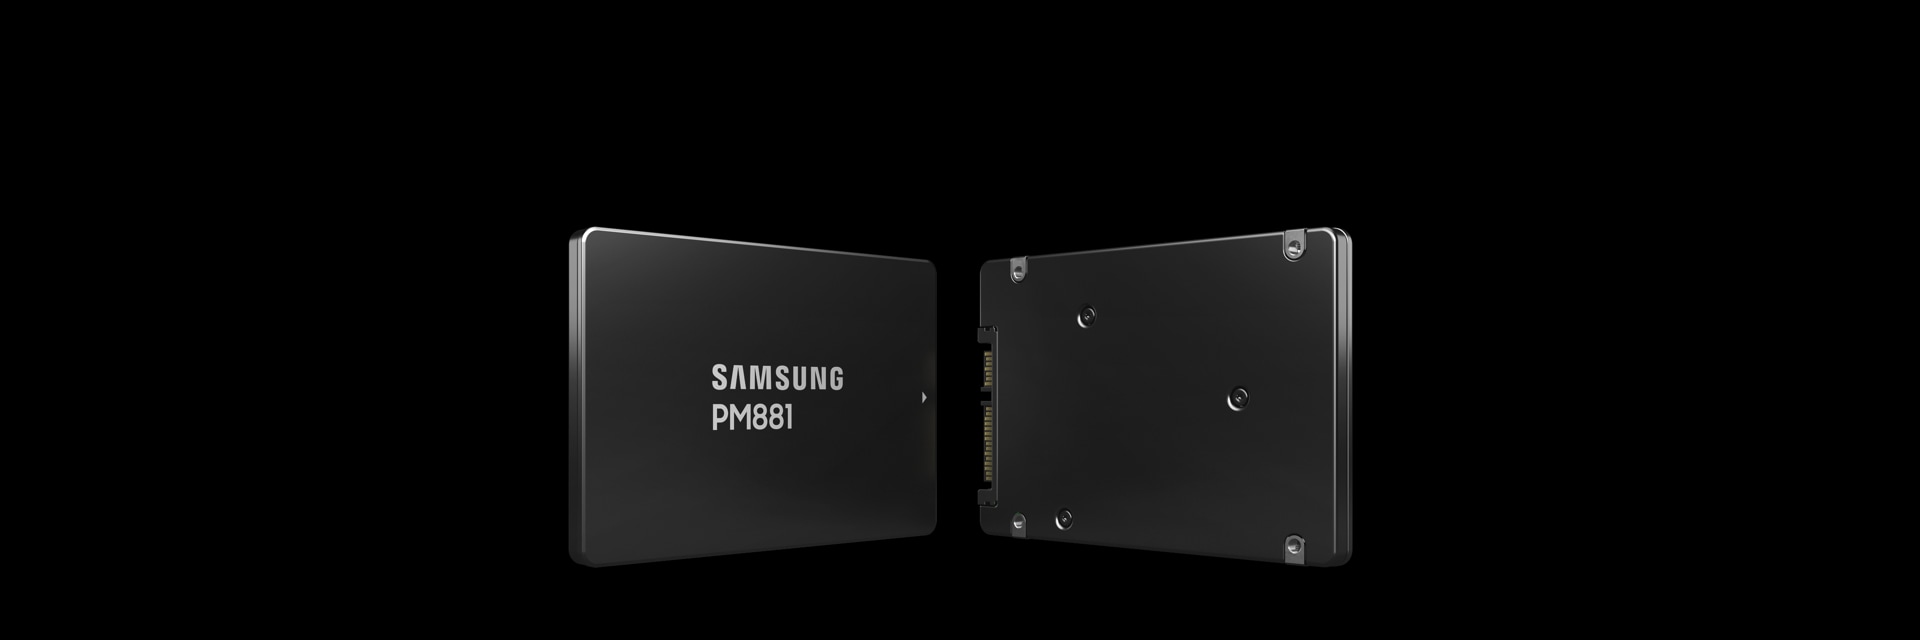 Samsung Semiconductor Client SSD, New SSD performance for PCs